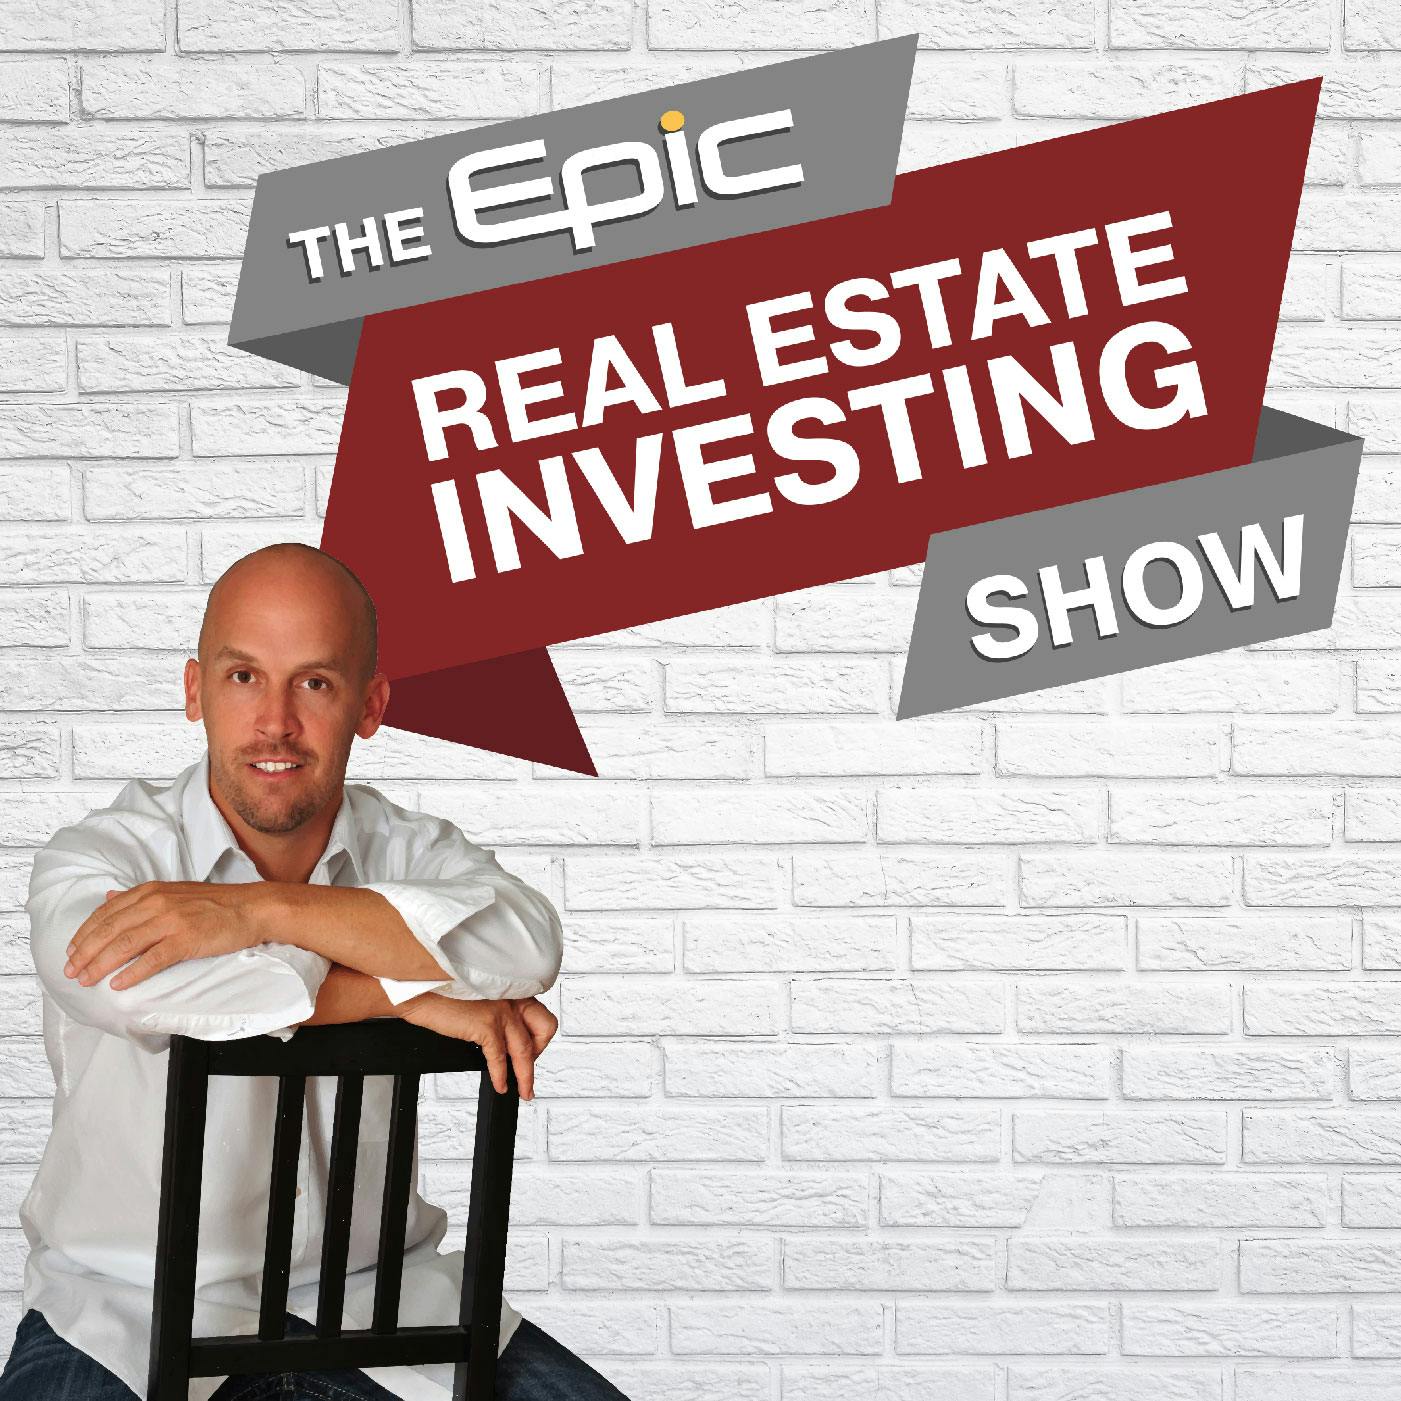 Did He Just Say He's No Longer Investing in Real Estate? | 1115